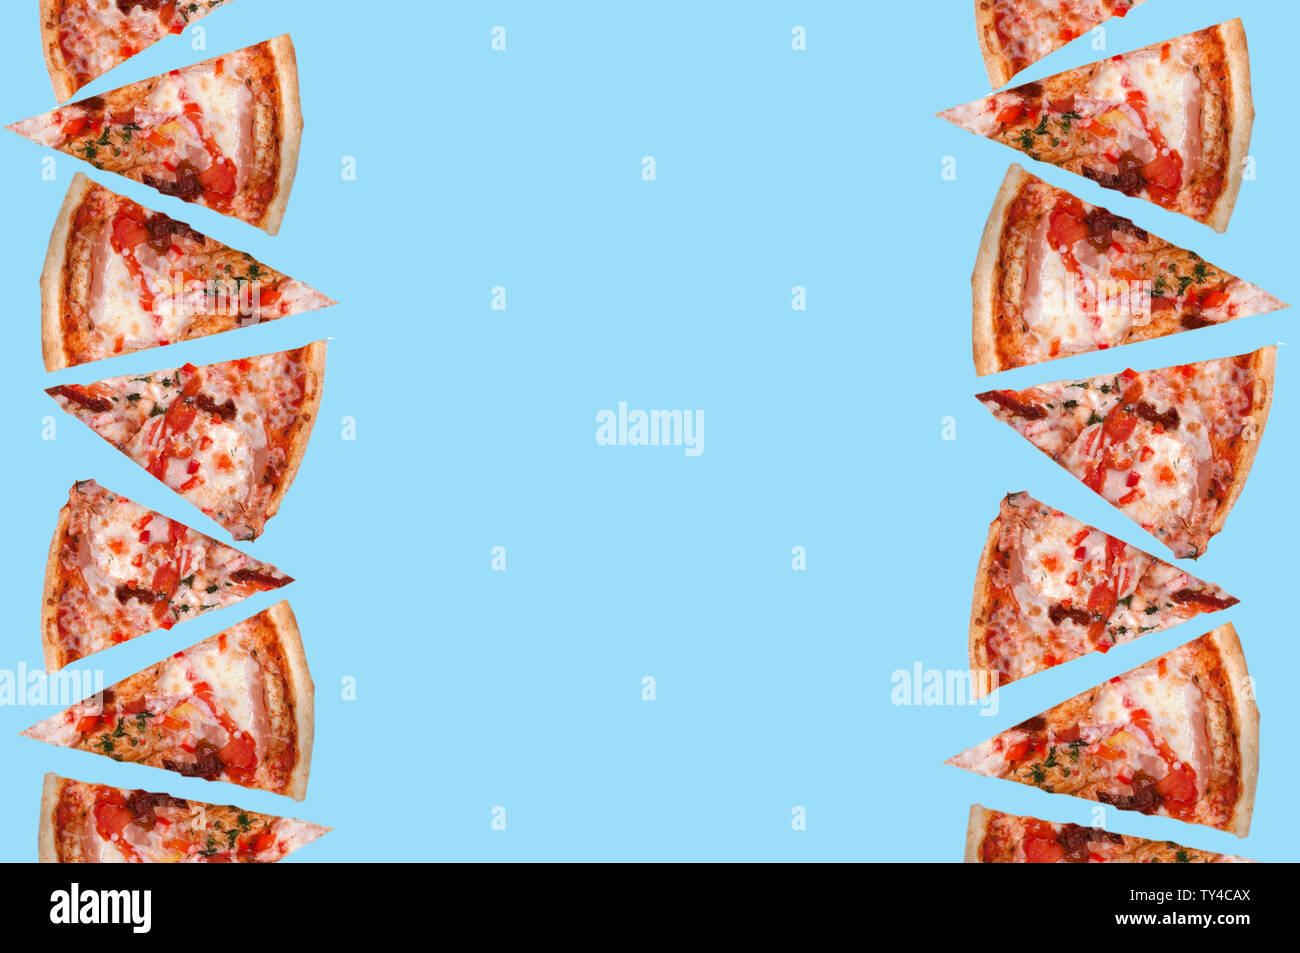 many triangular slices of pizza double row on the right and left side in the middle of the image free space on a light green background top view Stock Photo